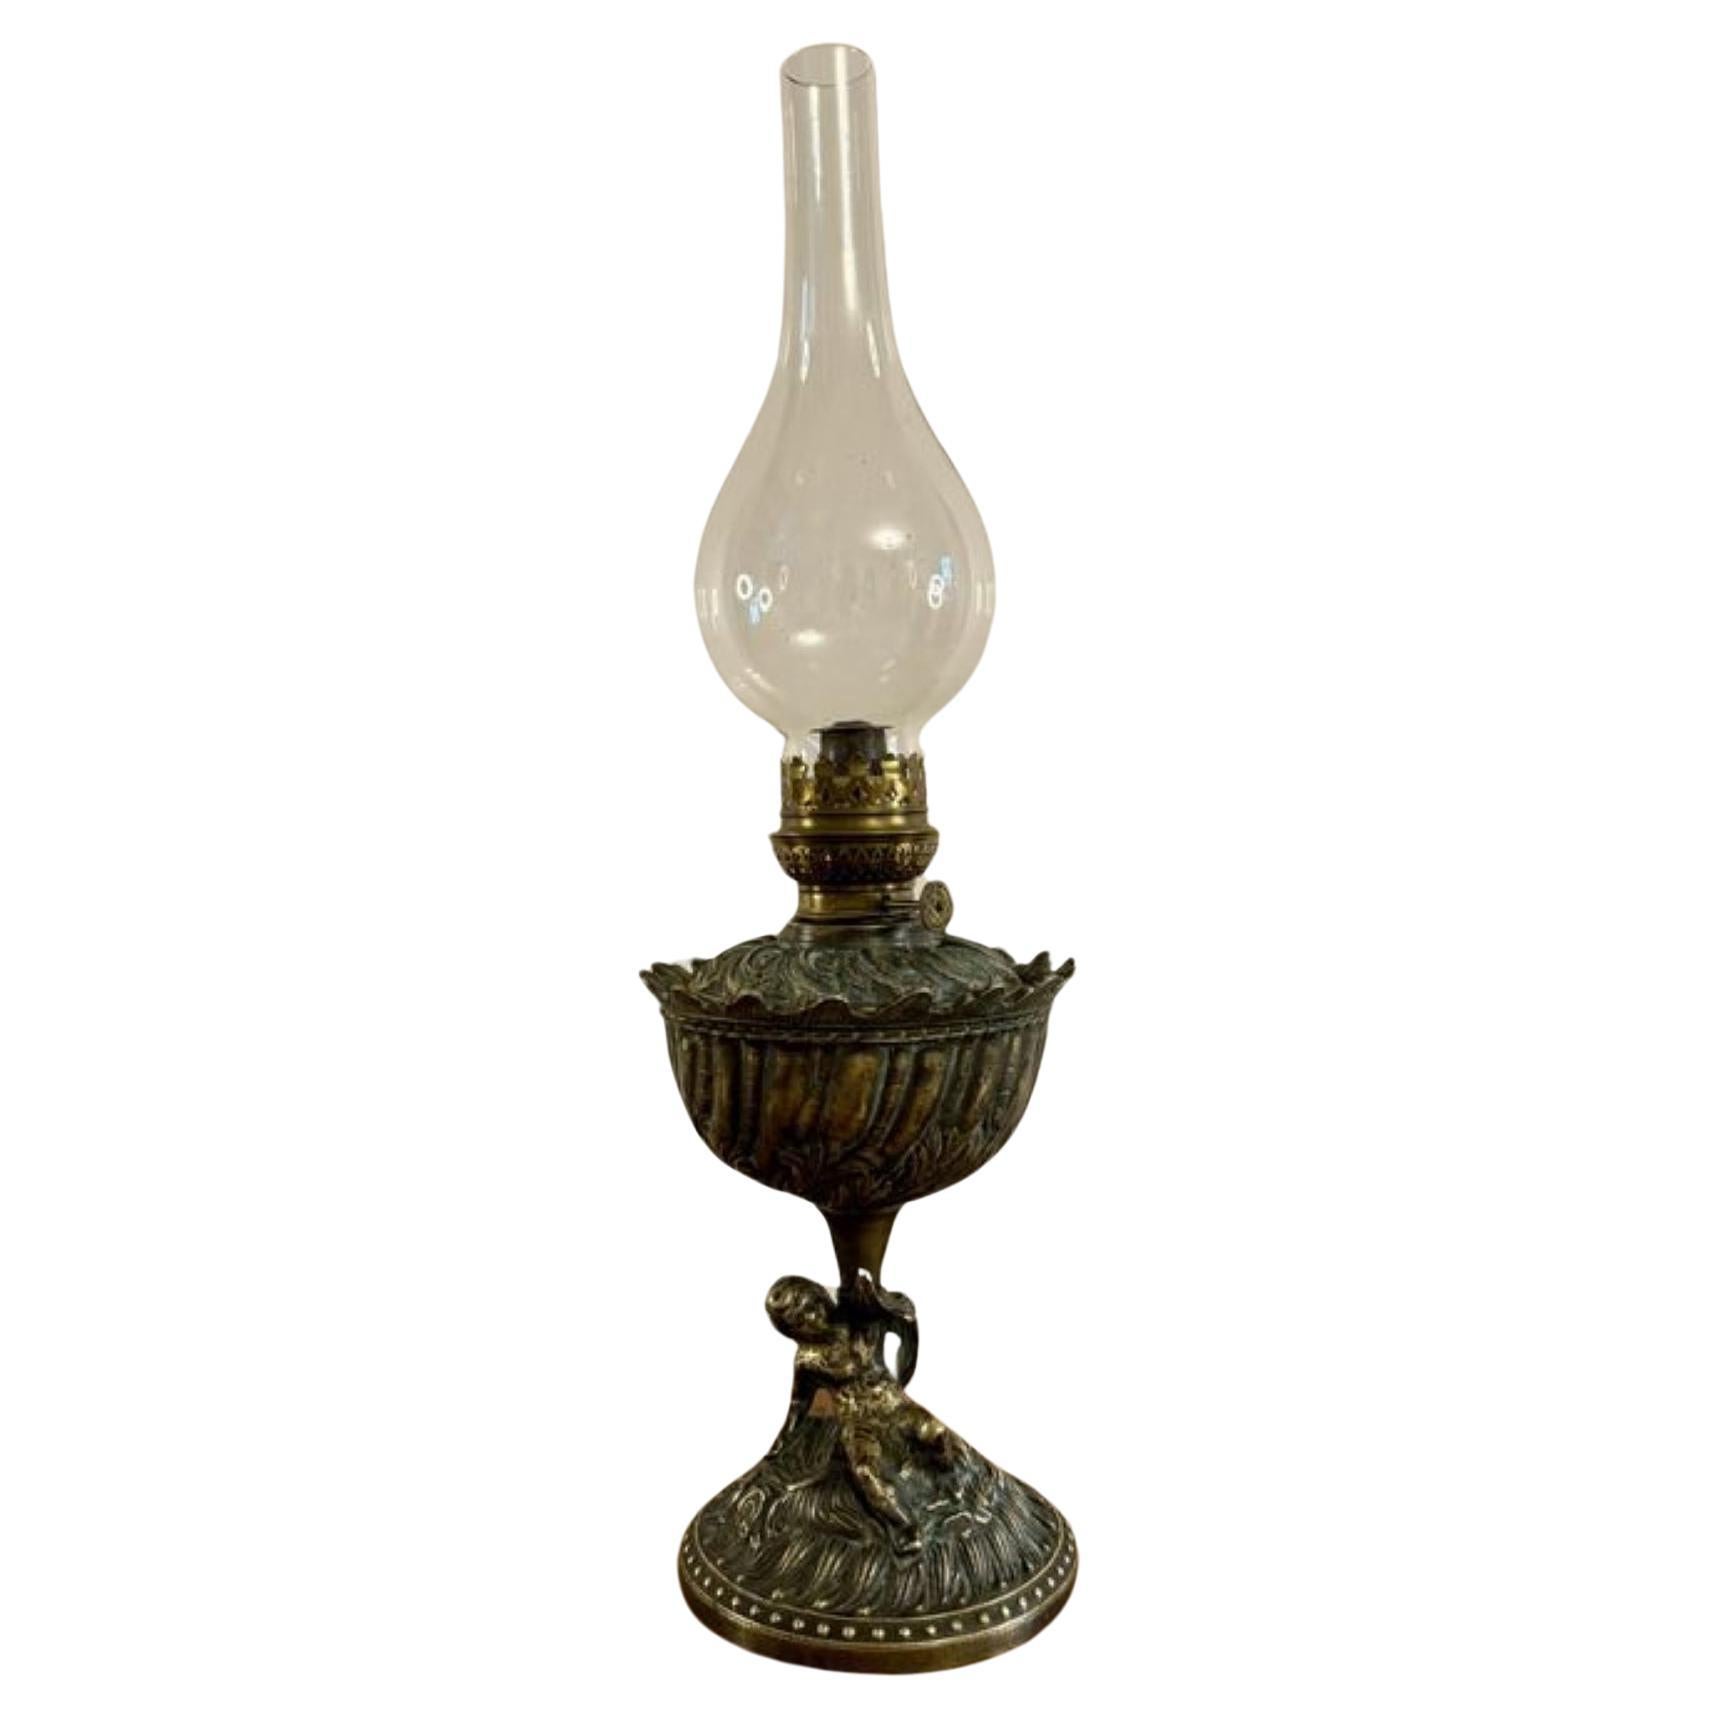 Unusual quality antique Victorian oil lamp For Sale